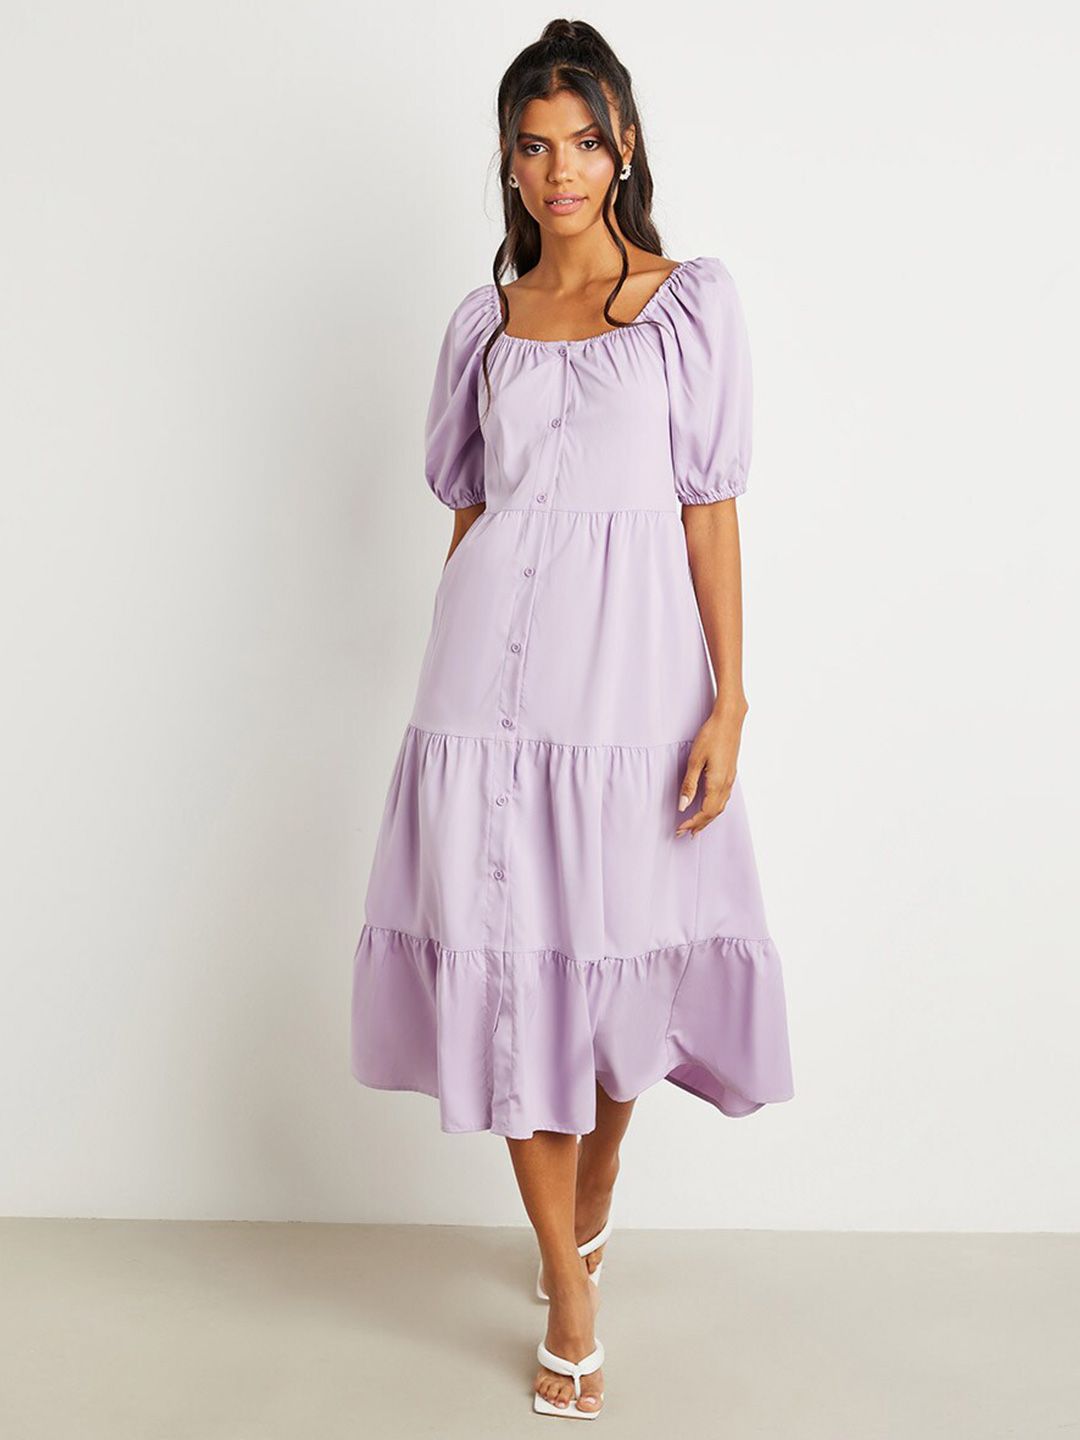 Styli Lavender Off-Shoulder A-Line Dress Price in India